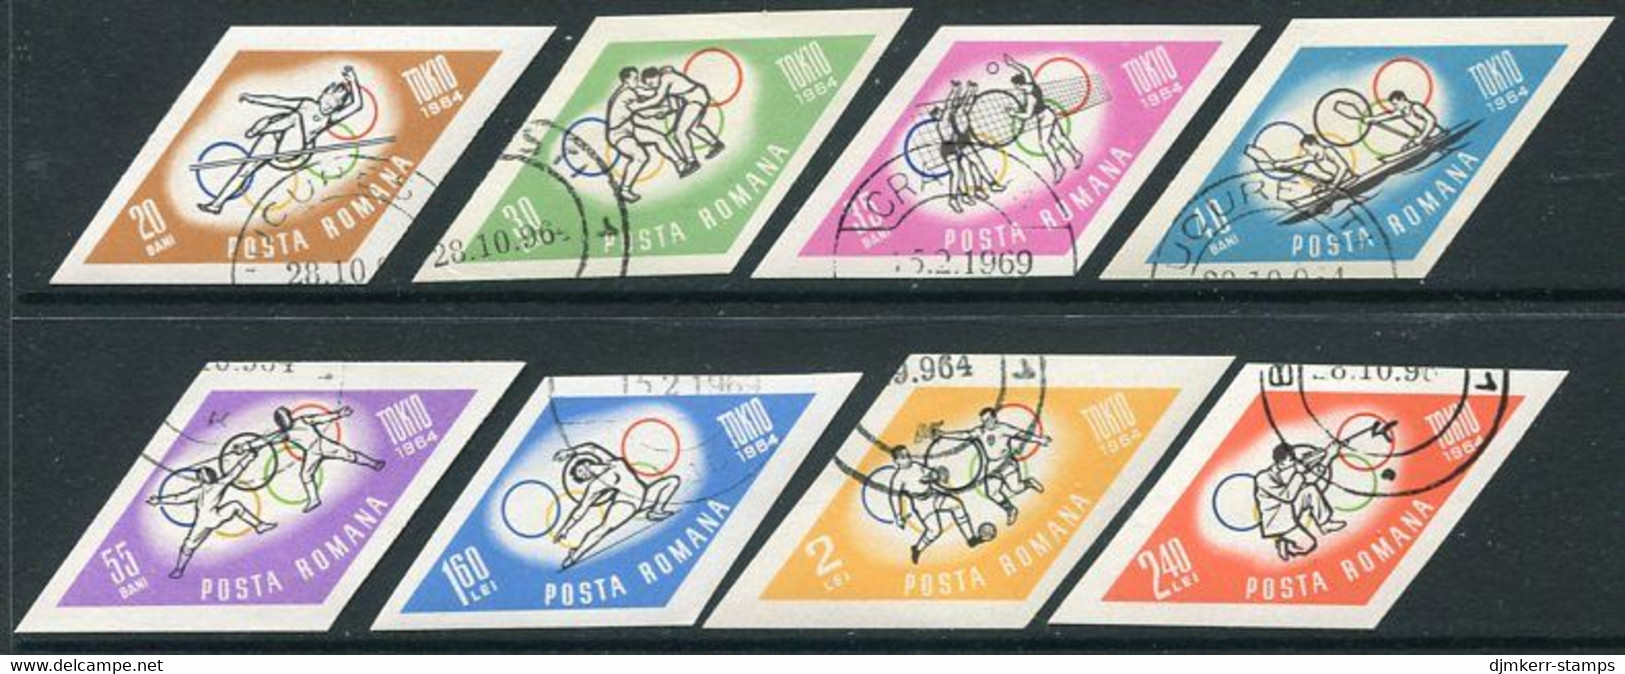 ROMANIA 1964 Tokyo Olympic Games Imperforate Used.  Michel 2317-24 - Used Stamps